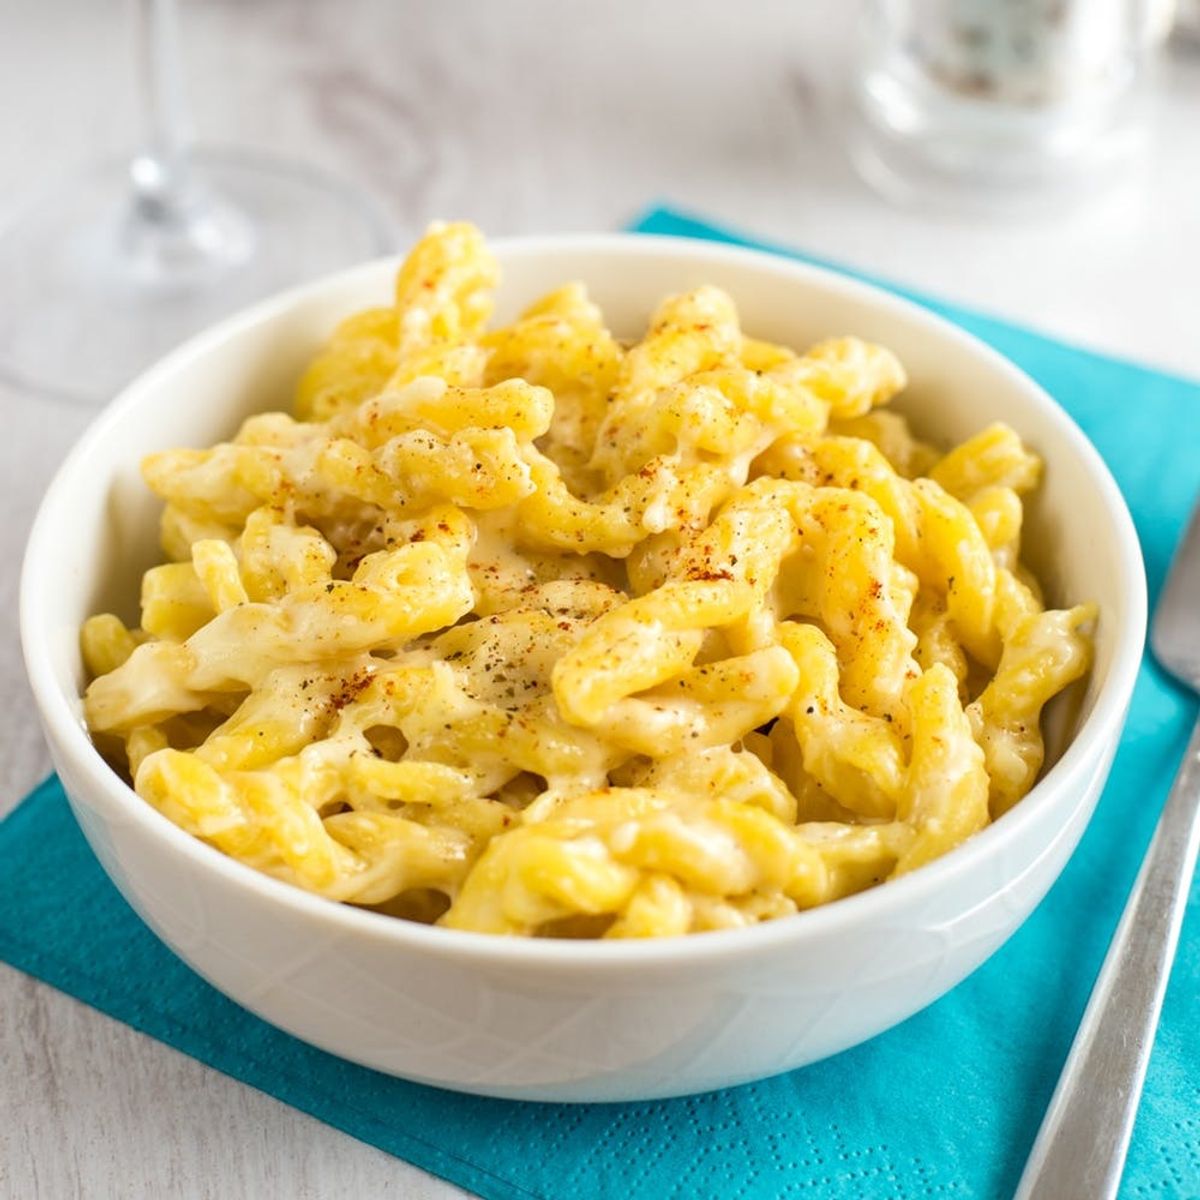 Cosy Evening Home Alone? This Single-Serving Mac and Cheese Recipe Is Just What You Need!